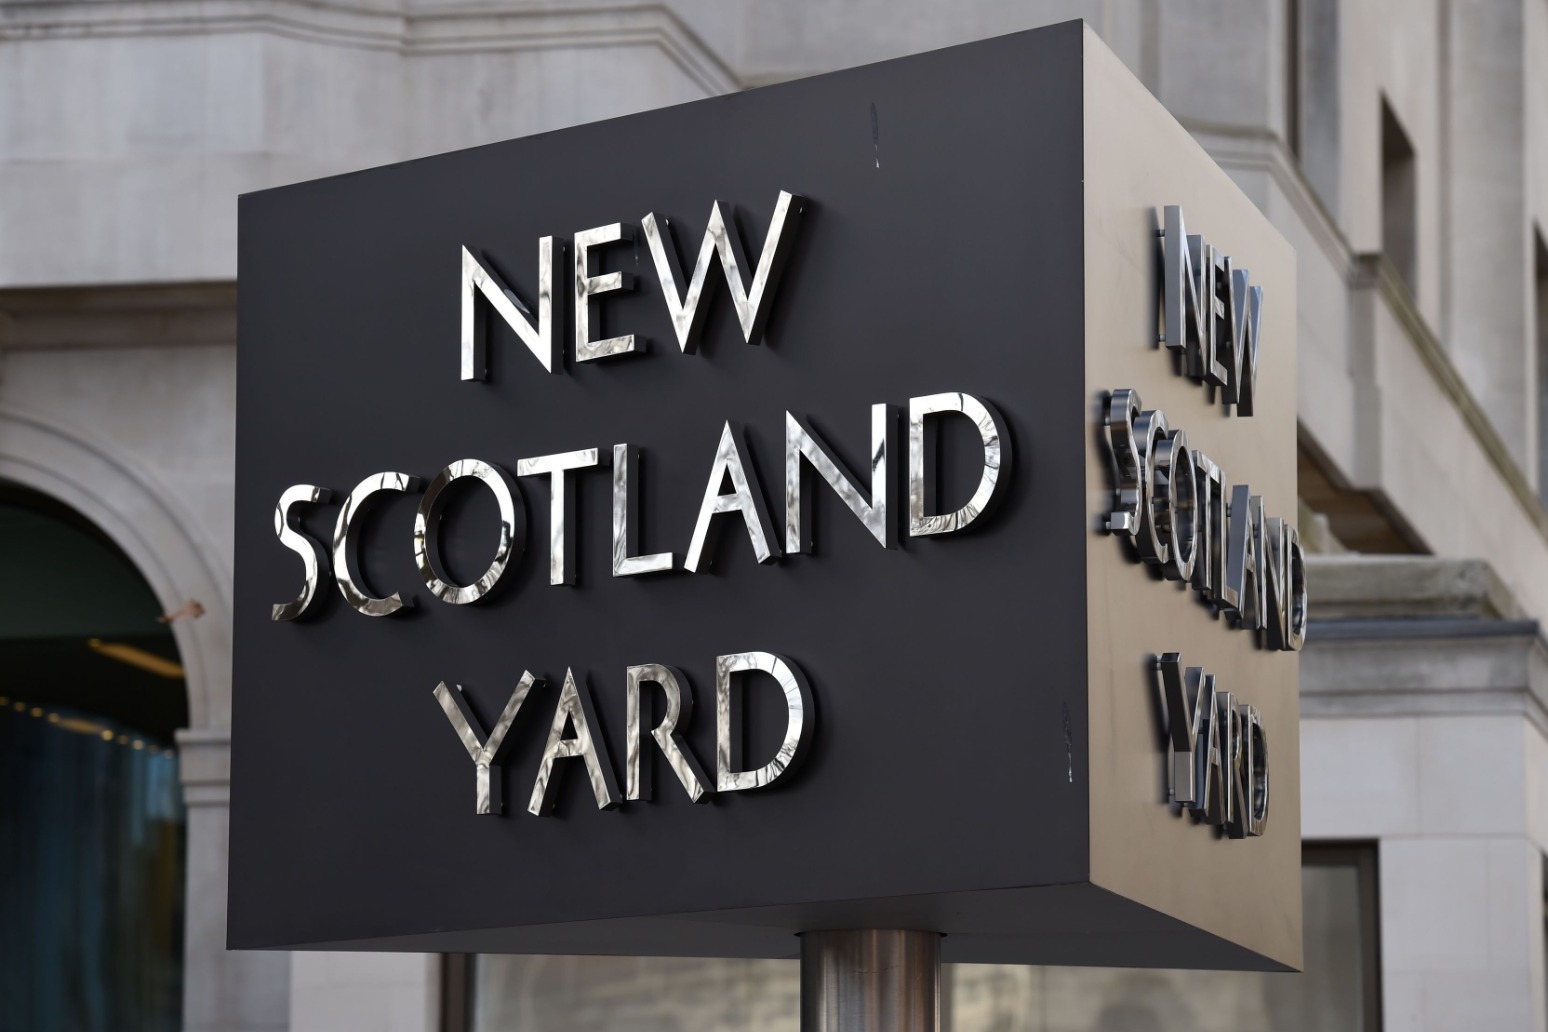 Watchdog raises ‘serious concerns’ over Met Police performance 